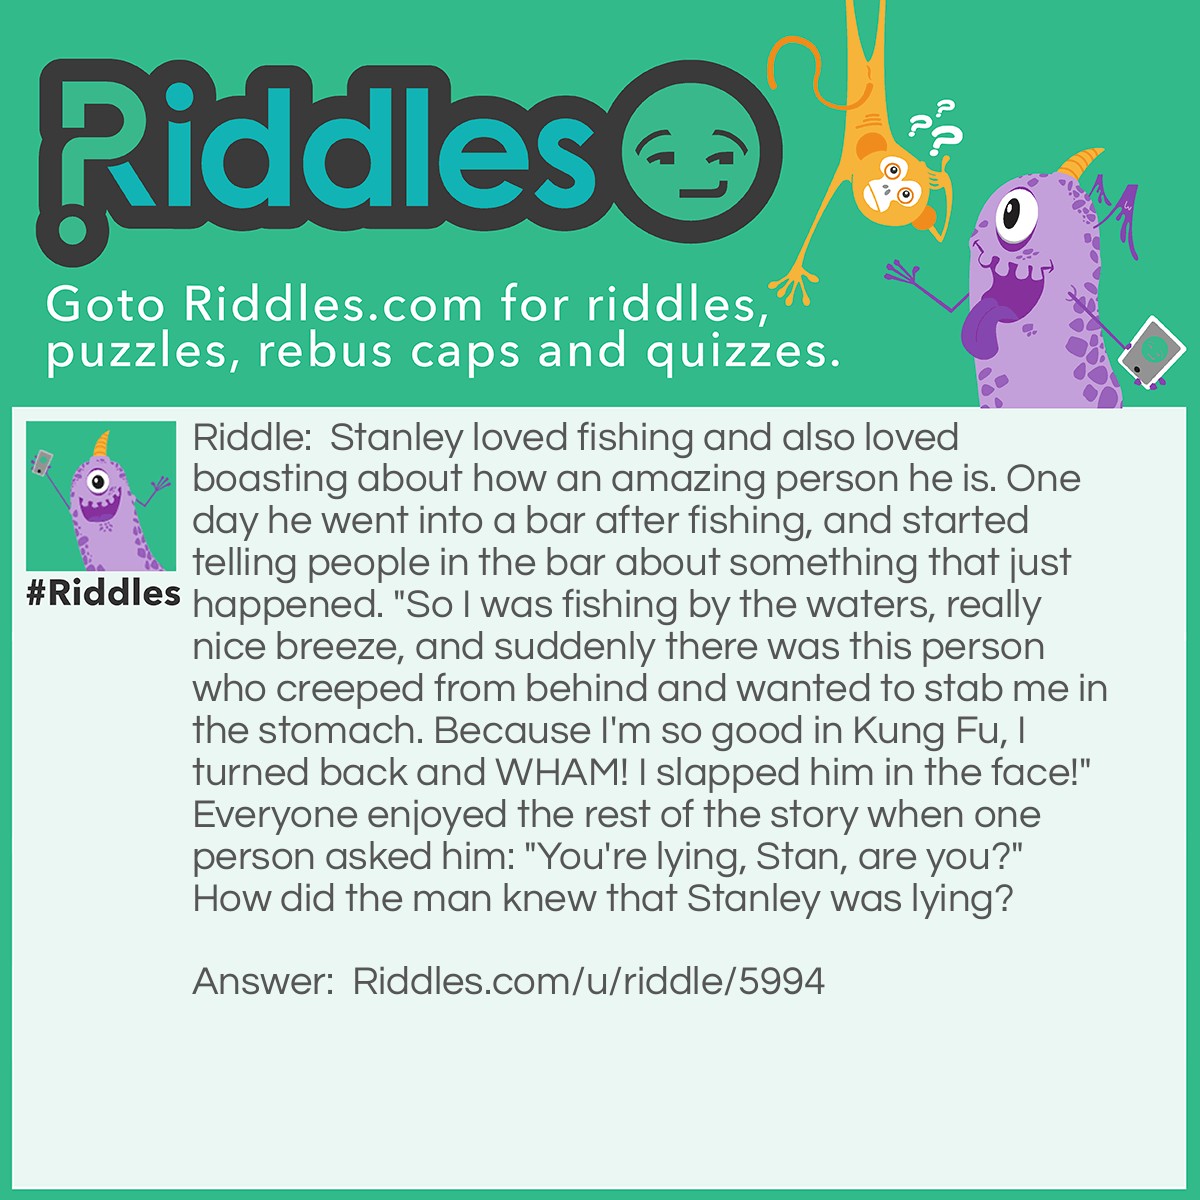 Riddle: Stanley loved fishing and also loved boasting about how an amazing person he is. One day he went into a bar after fishing, and started telling people in the bar about something that just happened. "So I was fishing by the waters, really nice breeze, and suddenly there was this person who creeped from behind and wanted to stab me in the stomach. Because I'm so good in Kung Fu, I turned back and WHAM! I slapped him in the face!" Everyone enjoyed the rest of the story when one person asked him: "You're lying, Stan, are you?" How did the man knew that Stanley was lying? Answer: How can the man stab Stanley in the stomach if he's creeping up from BEHIND?